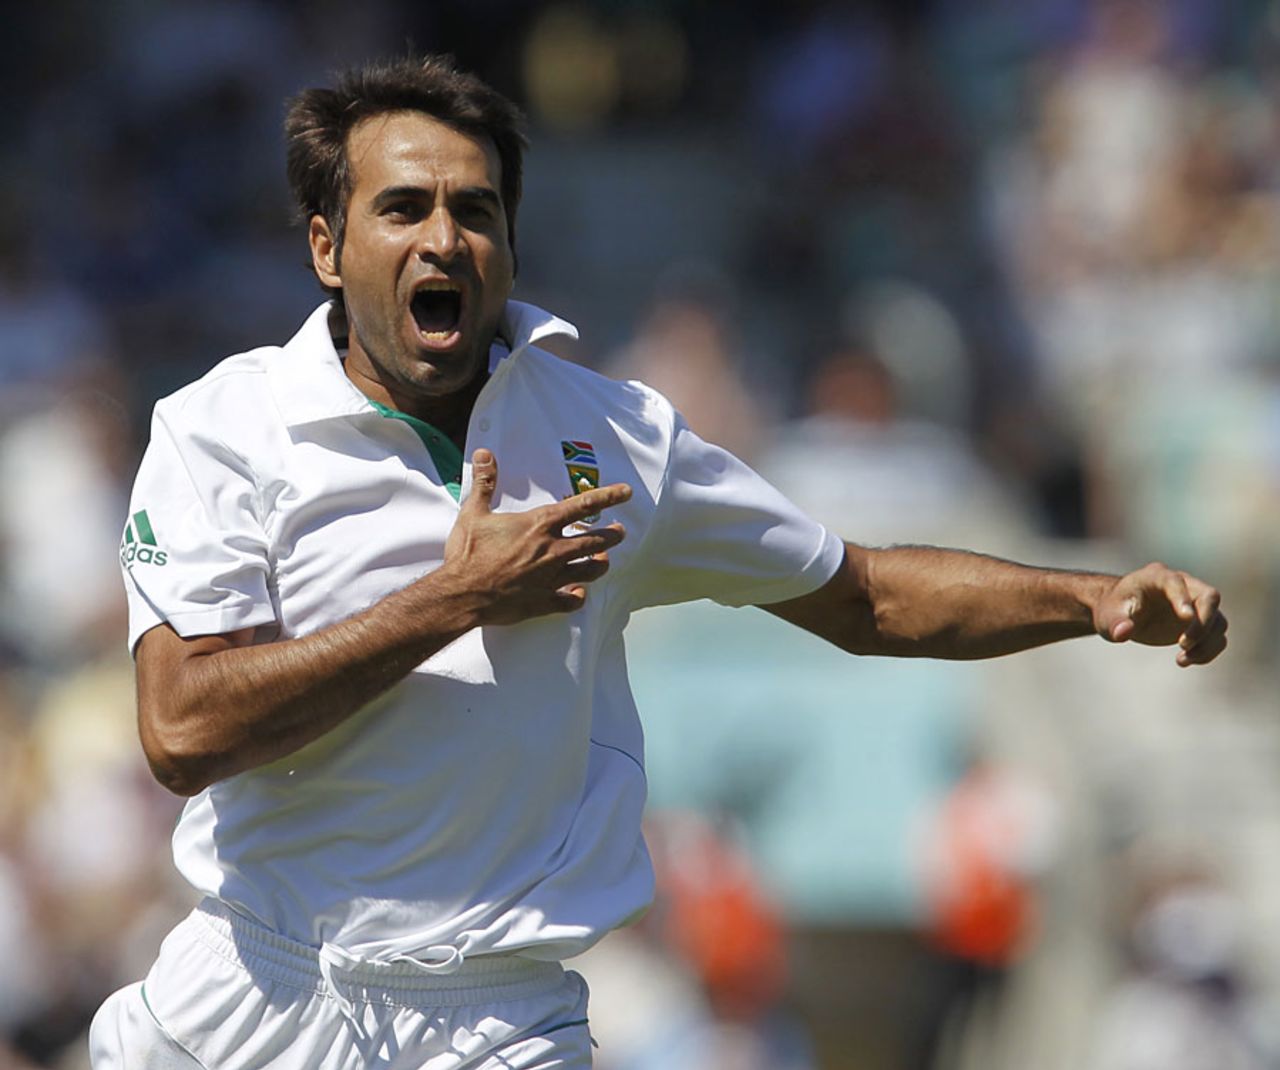 Imran Tahir certainly enjoyed his success, England v South Africa, 1st Test, The Oval, 5th Day, July, 23, 2012